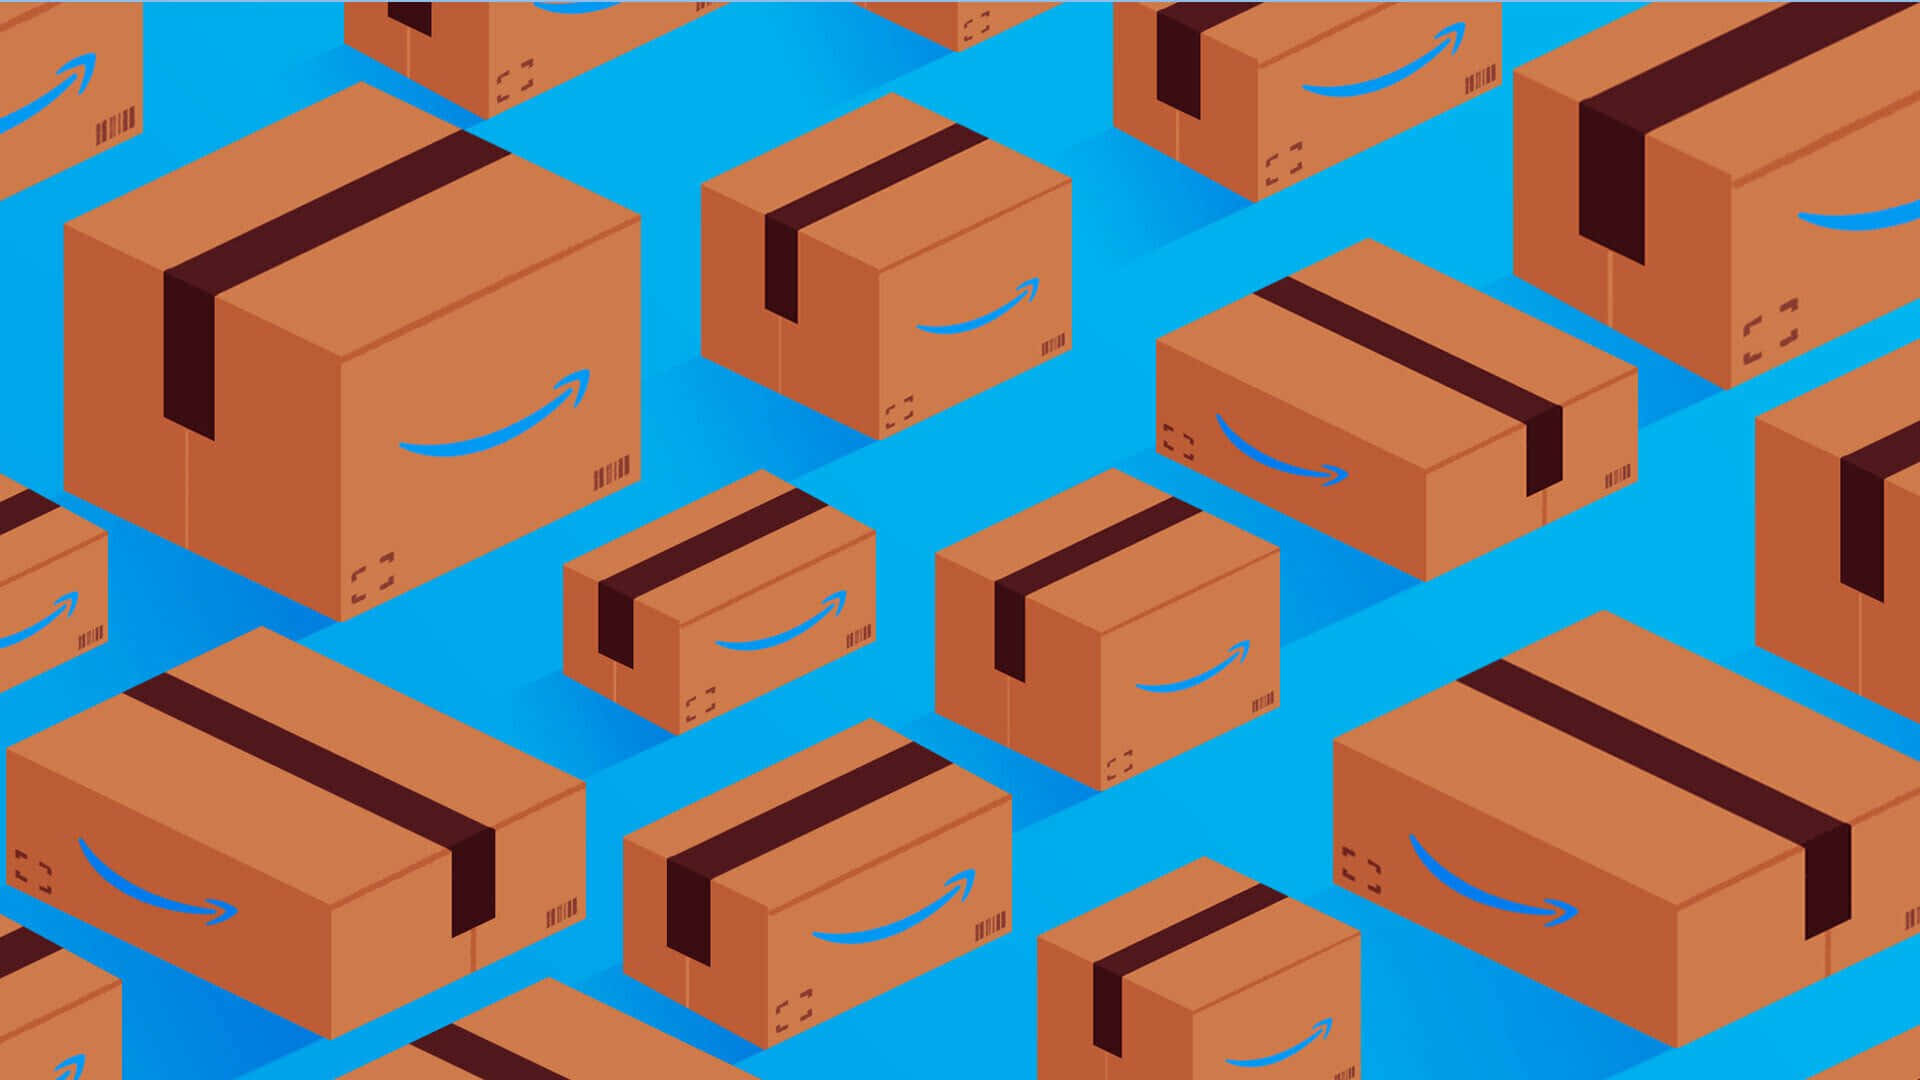 Prime Day Delivery Boxes Pattern Wallpaper